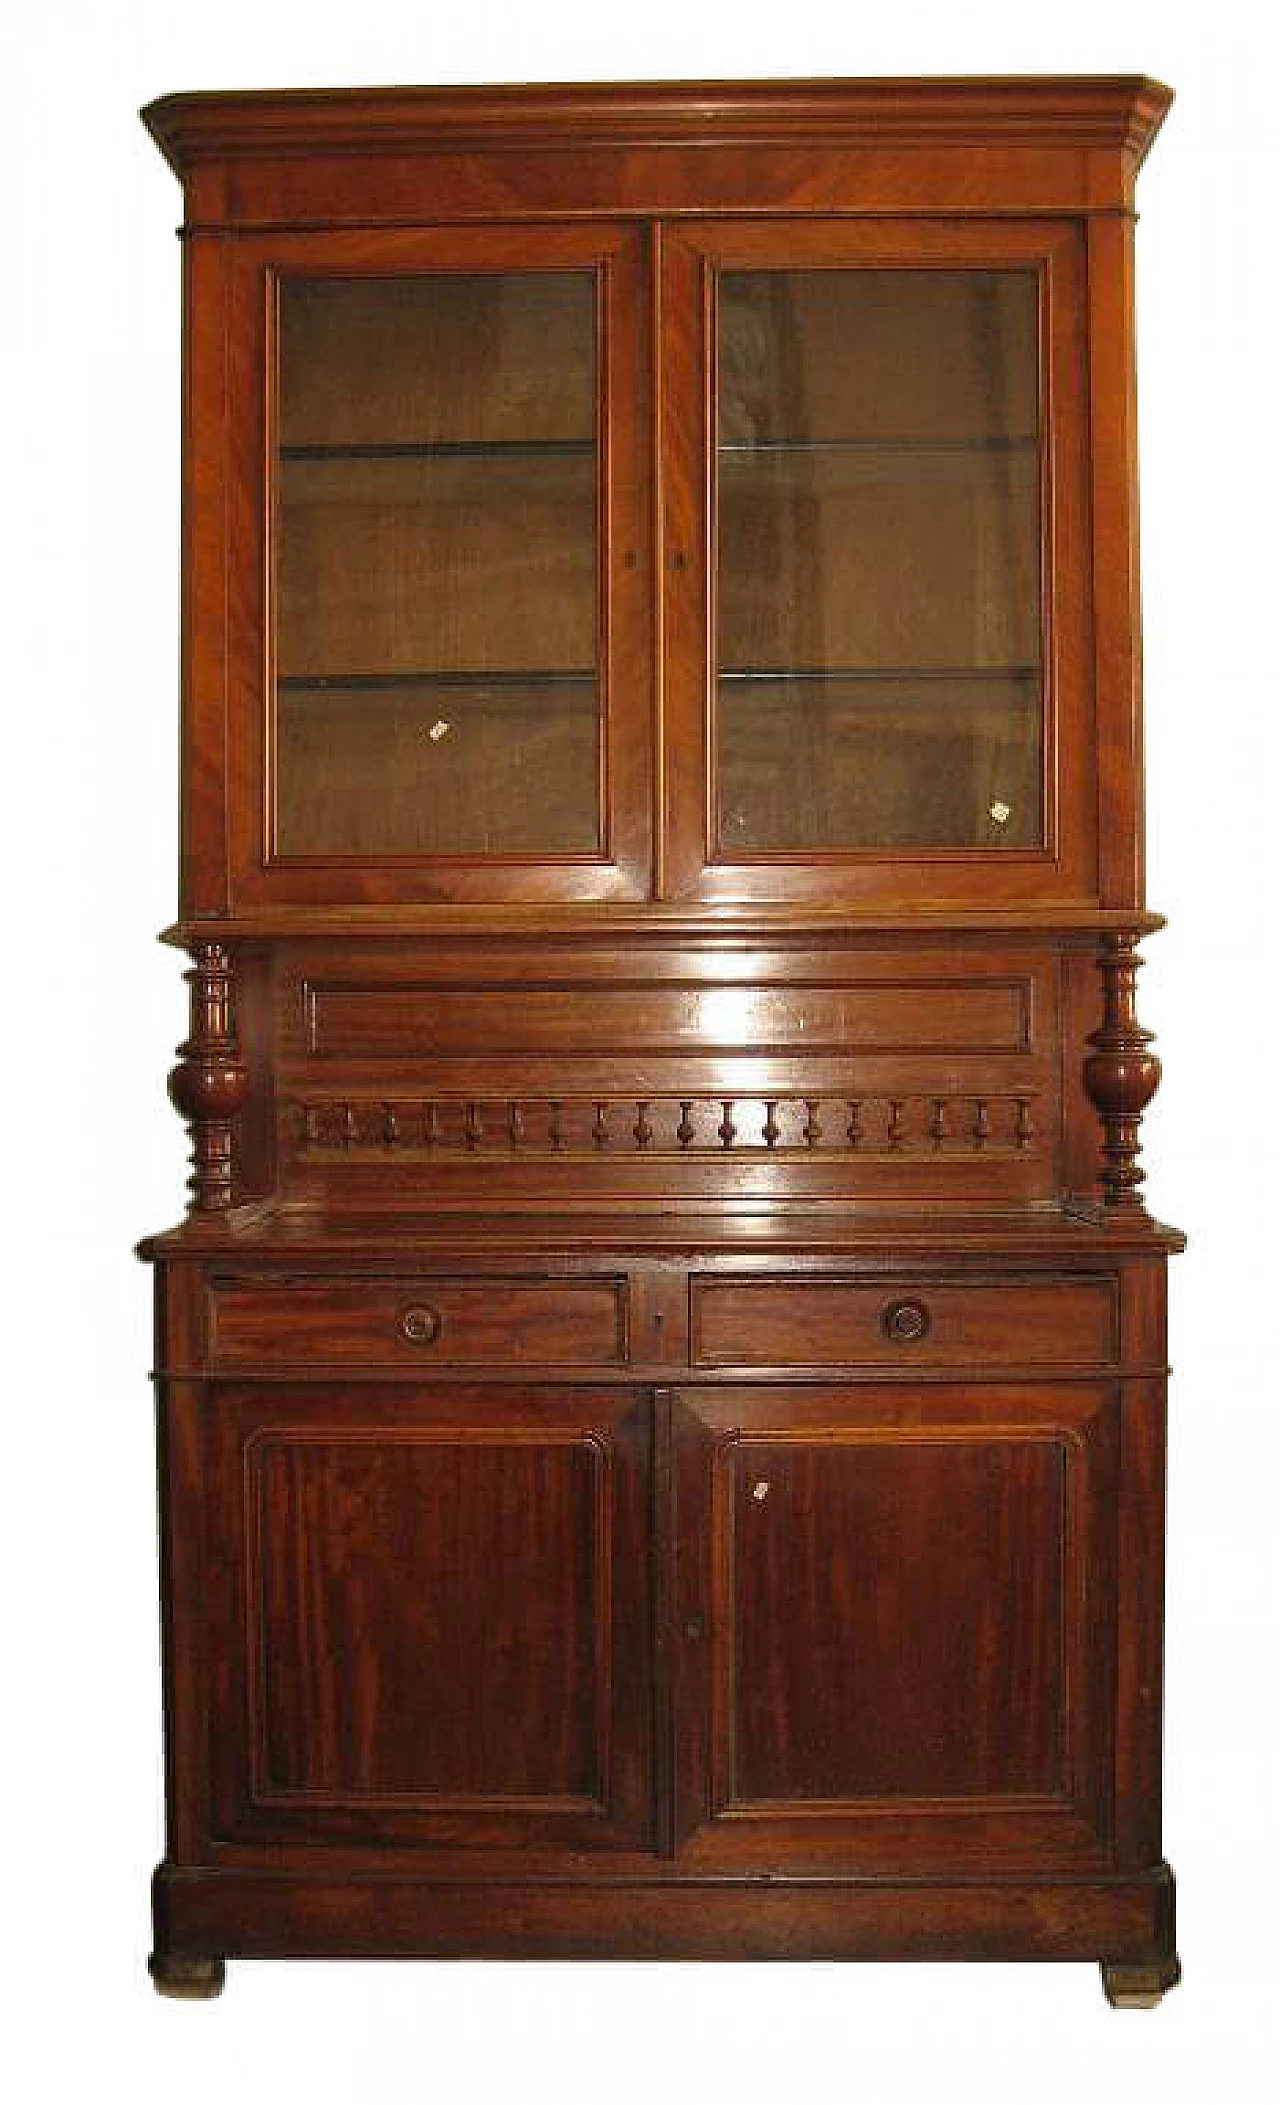 Two-body sideboard in mahogany and glass, 10s 1217754